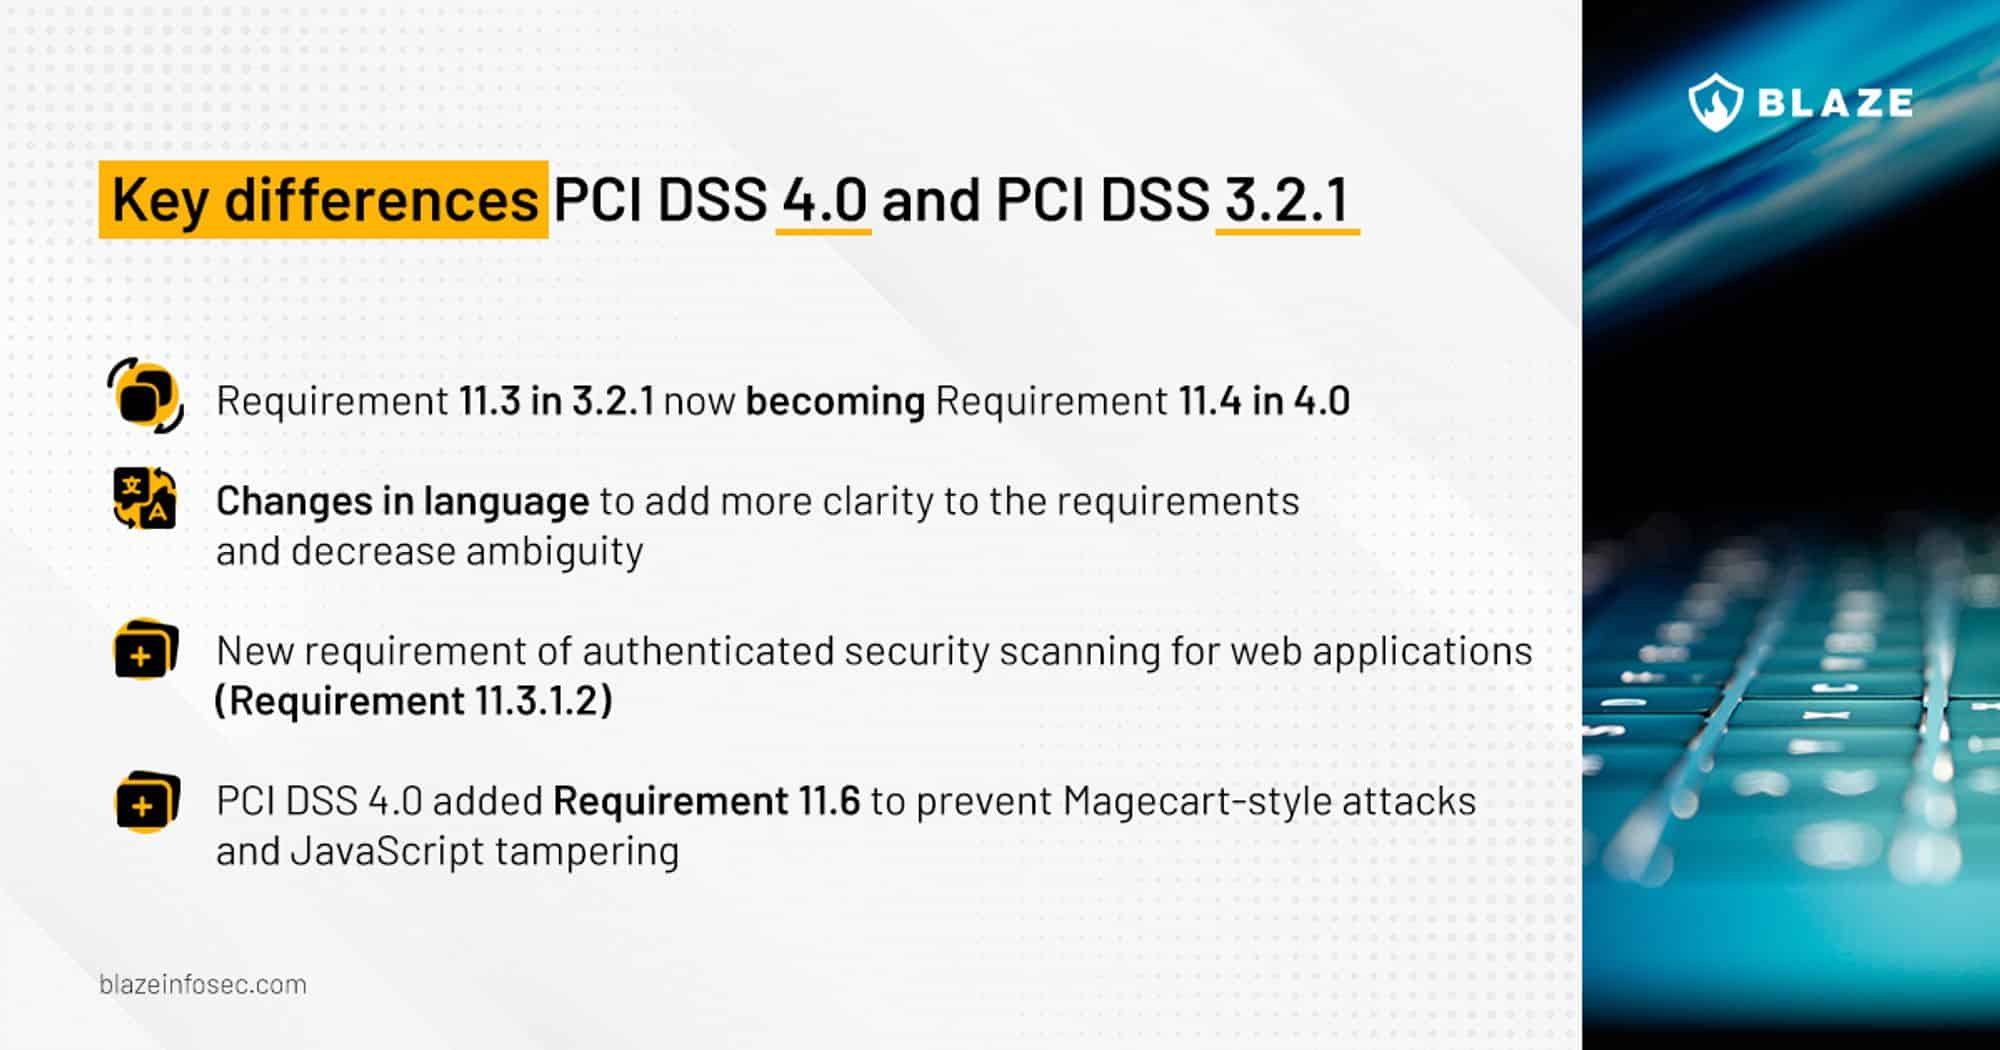 Differences PCI DSS 4.0 and 3.2.1